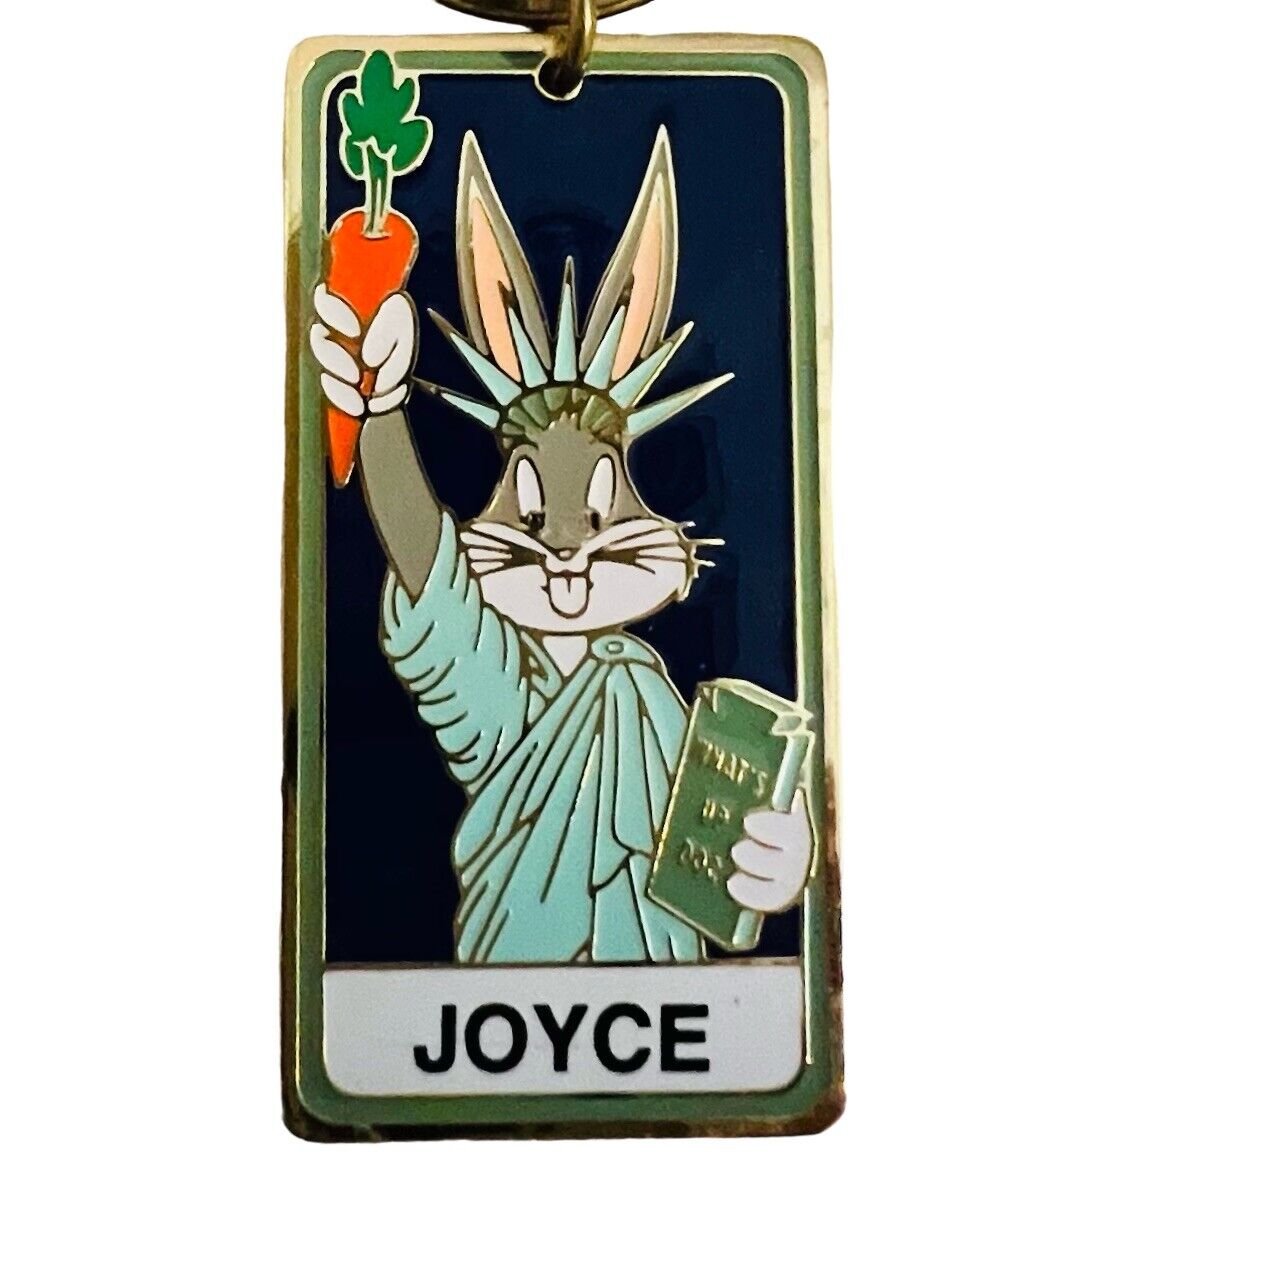 Bugs Bunny Warner Bros. Statue of Liberty Personalized Key Chain Name JOYCE VTG